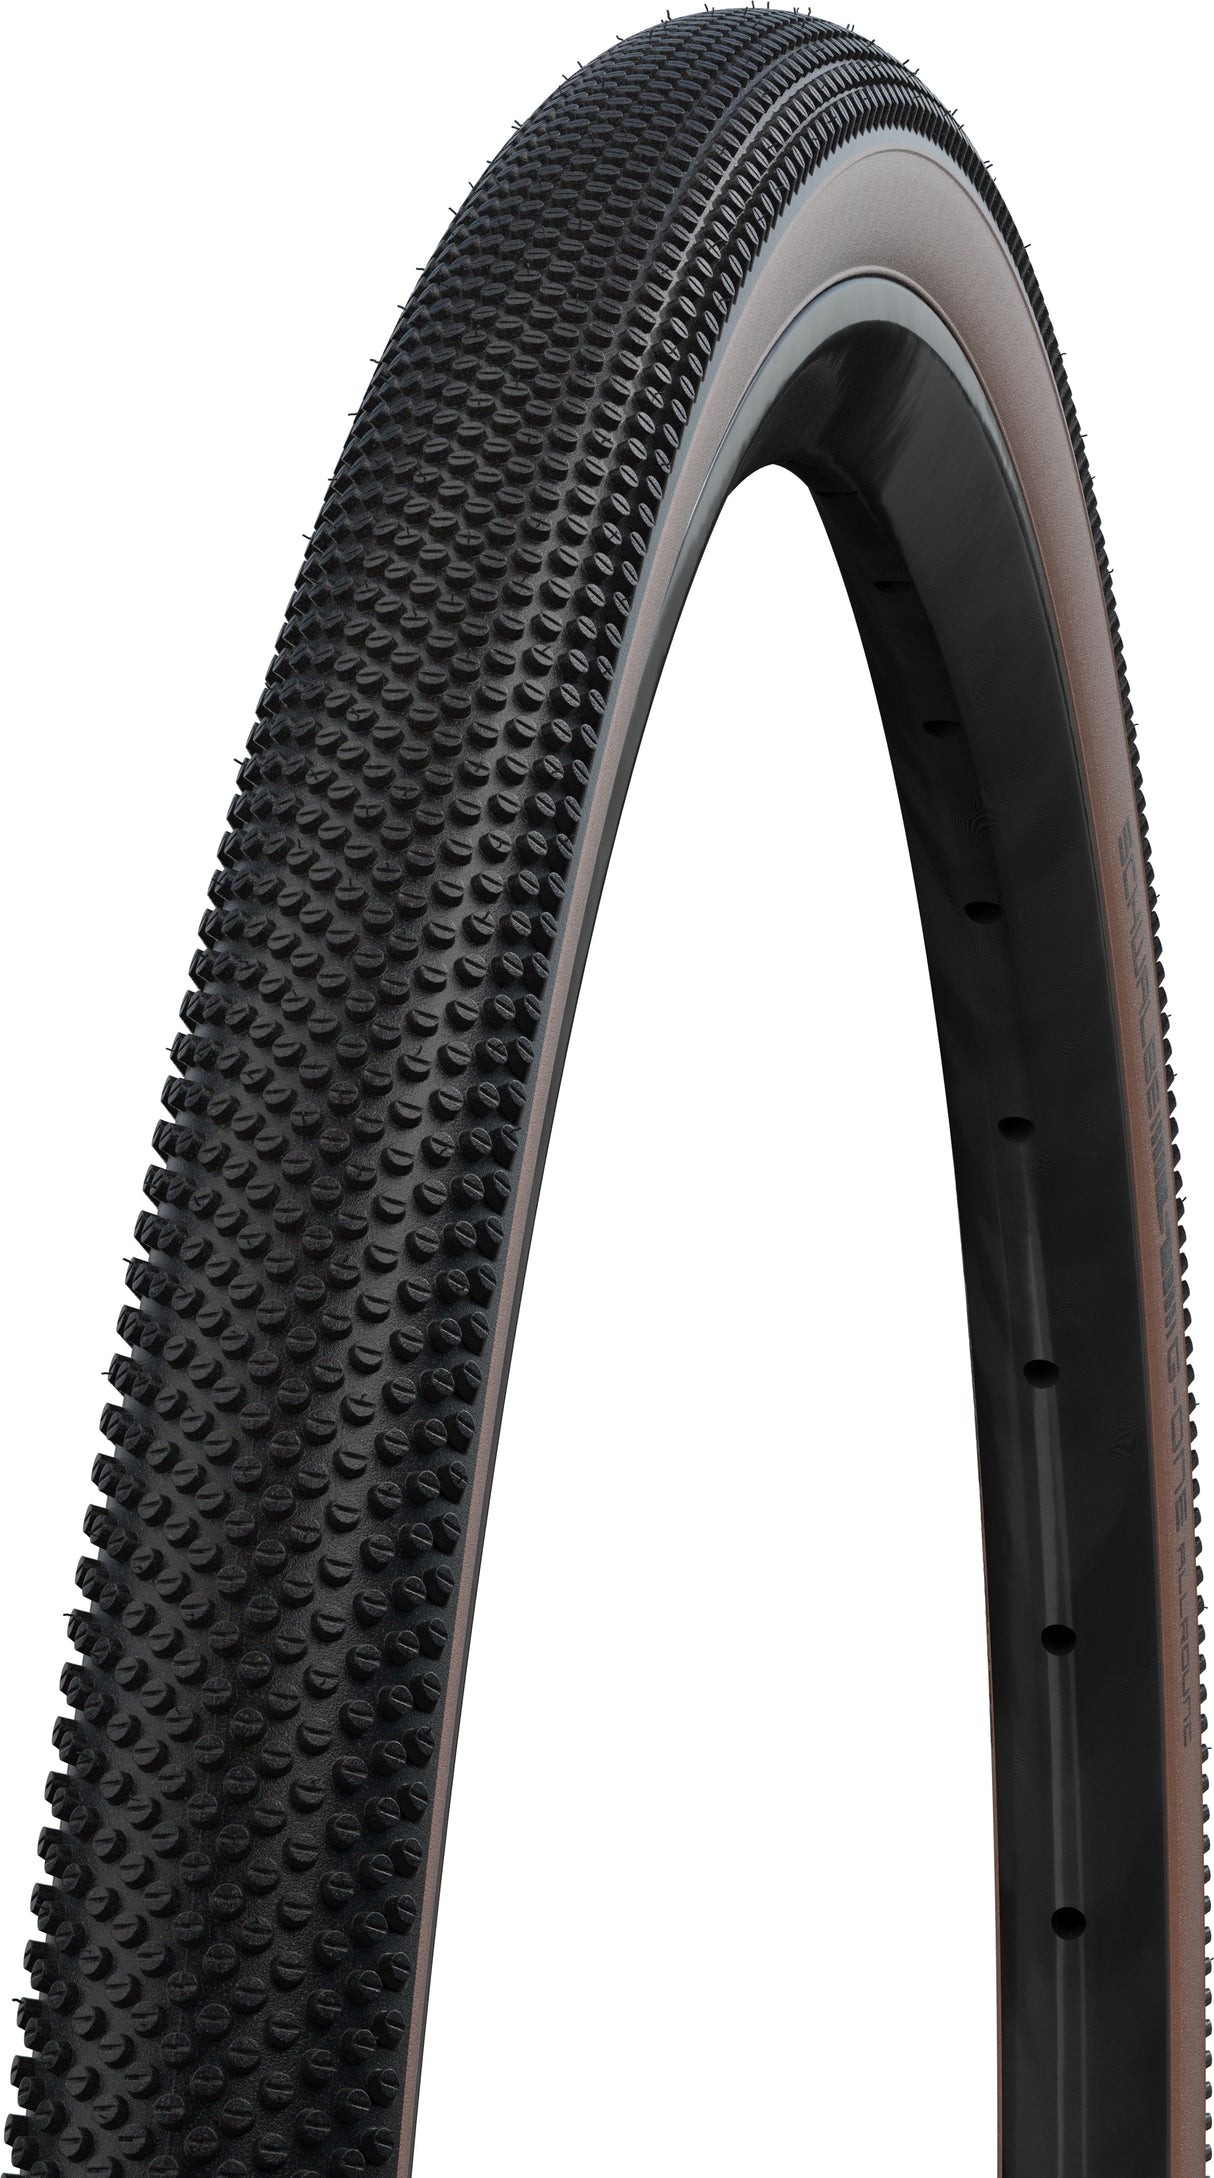 SCHWALBE G-One allround vouwband 700x40C Performance RaceGuard TLE